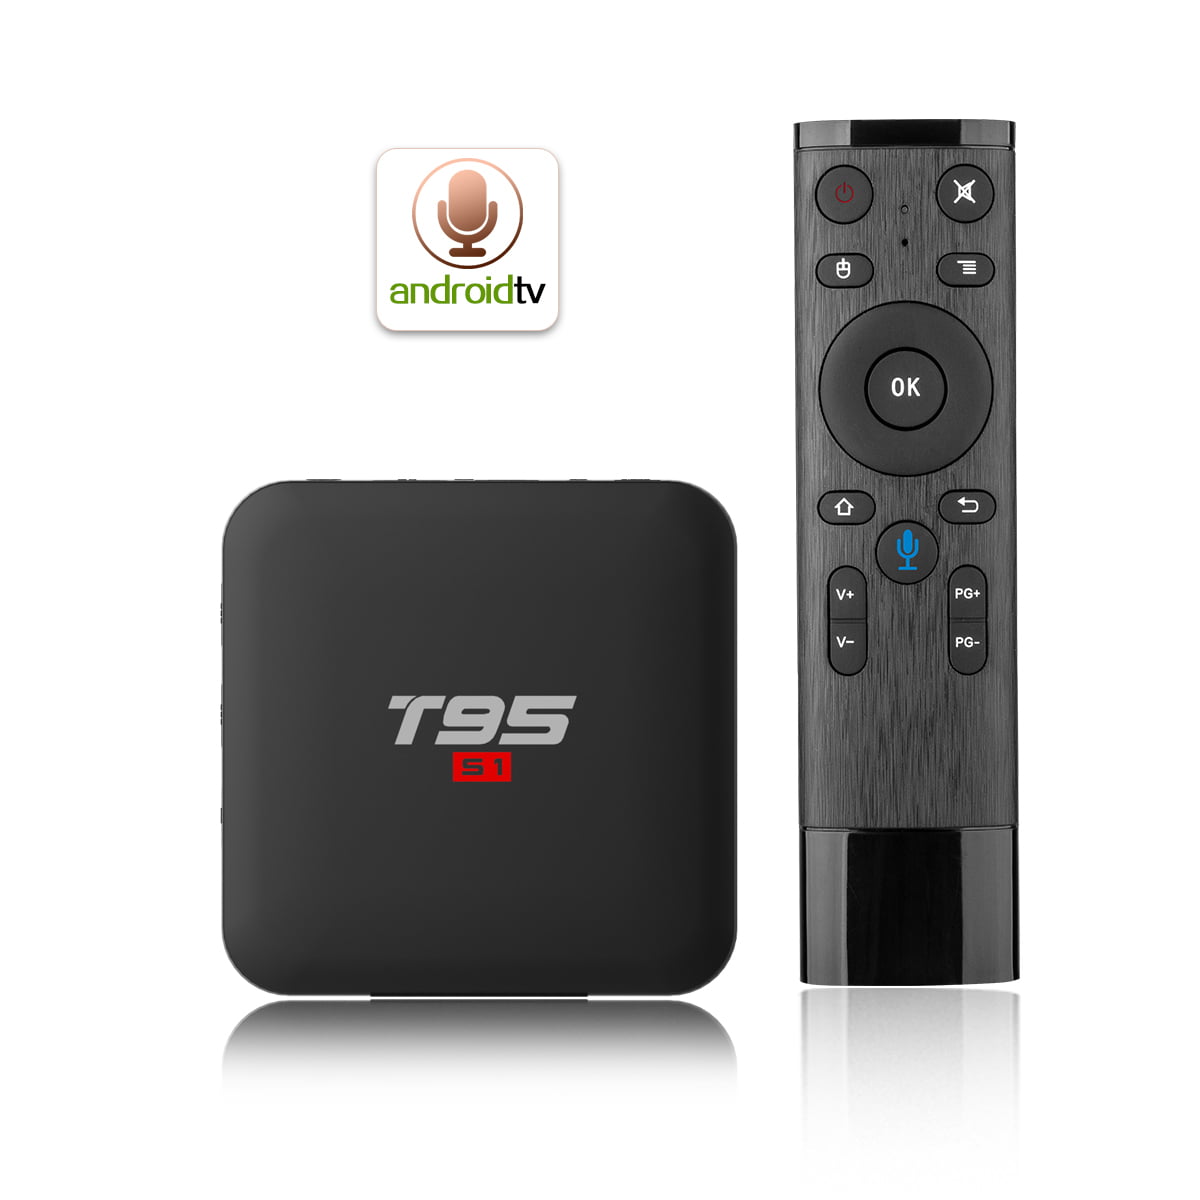 Firefly T95 S1 Android Smart TV Box 64bit Quad H6 2Ghz 2G DDR3 16G flash Android 7.1 7